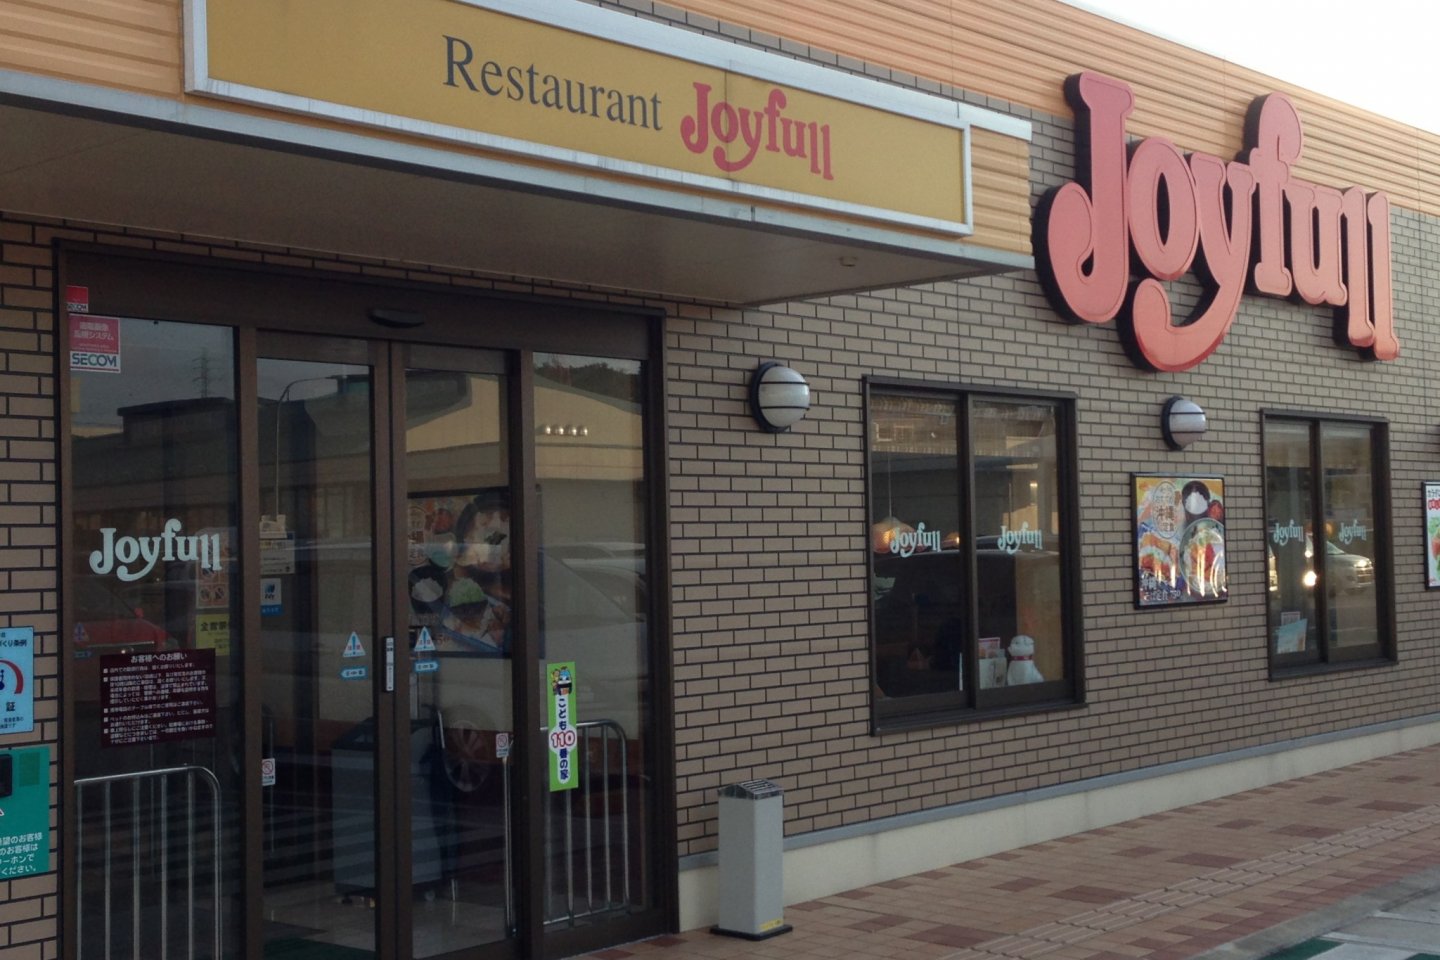 Restaurant Joyful is a family coffee shop style restaurant with locations throughout Japan